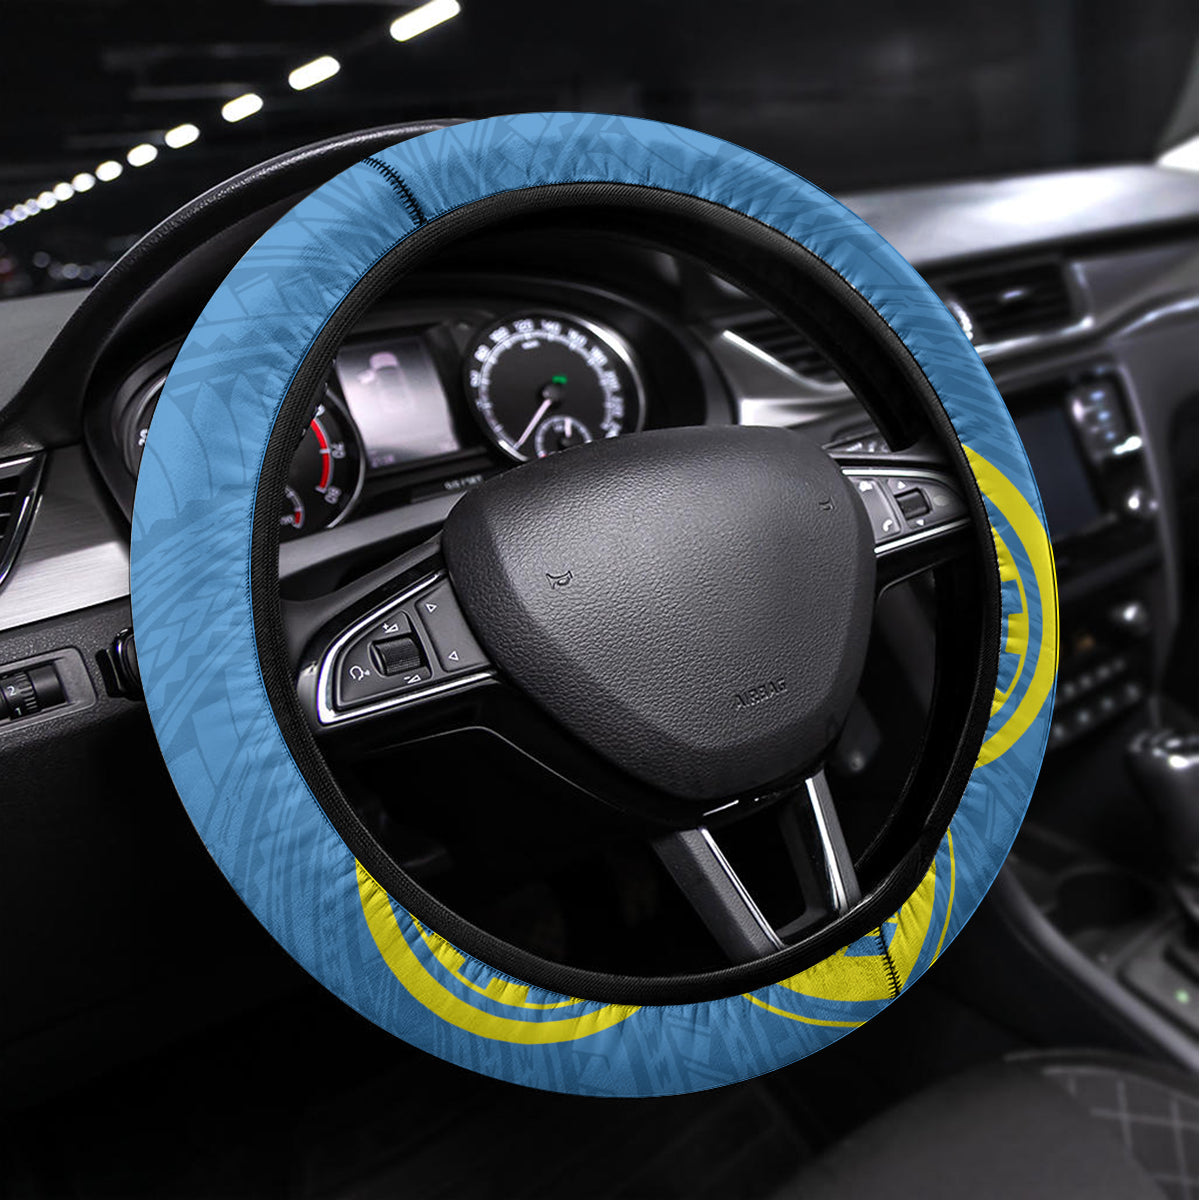 Palau Constitution Day Steering Wheel Cover Belau Seal With Frangipani Polynesian Pattern - Blue